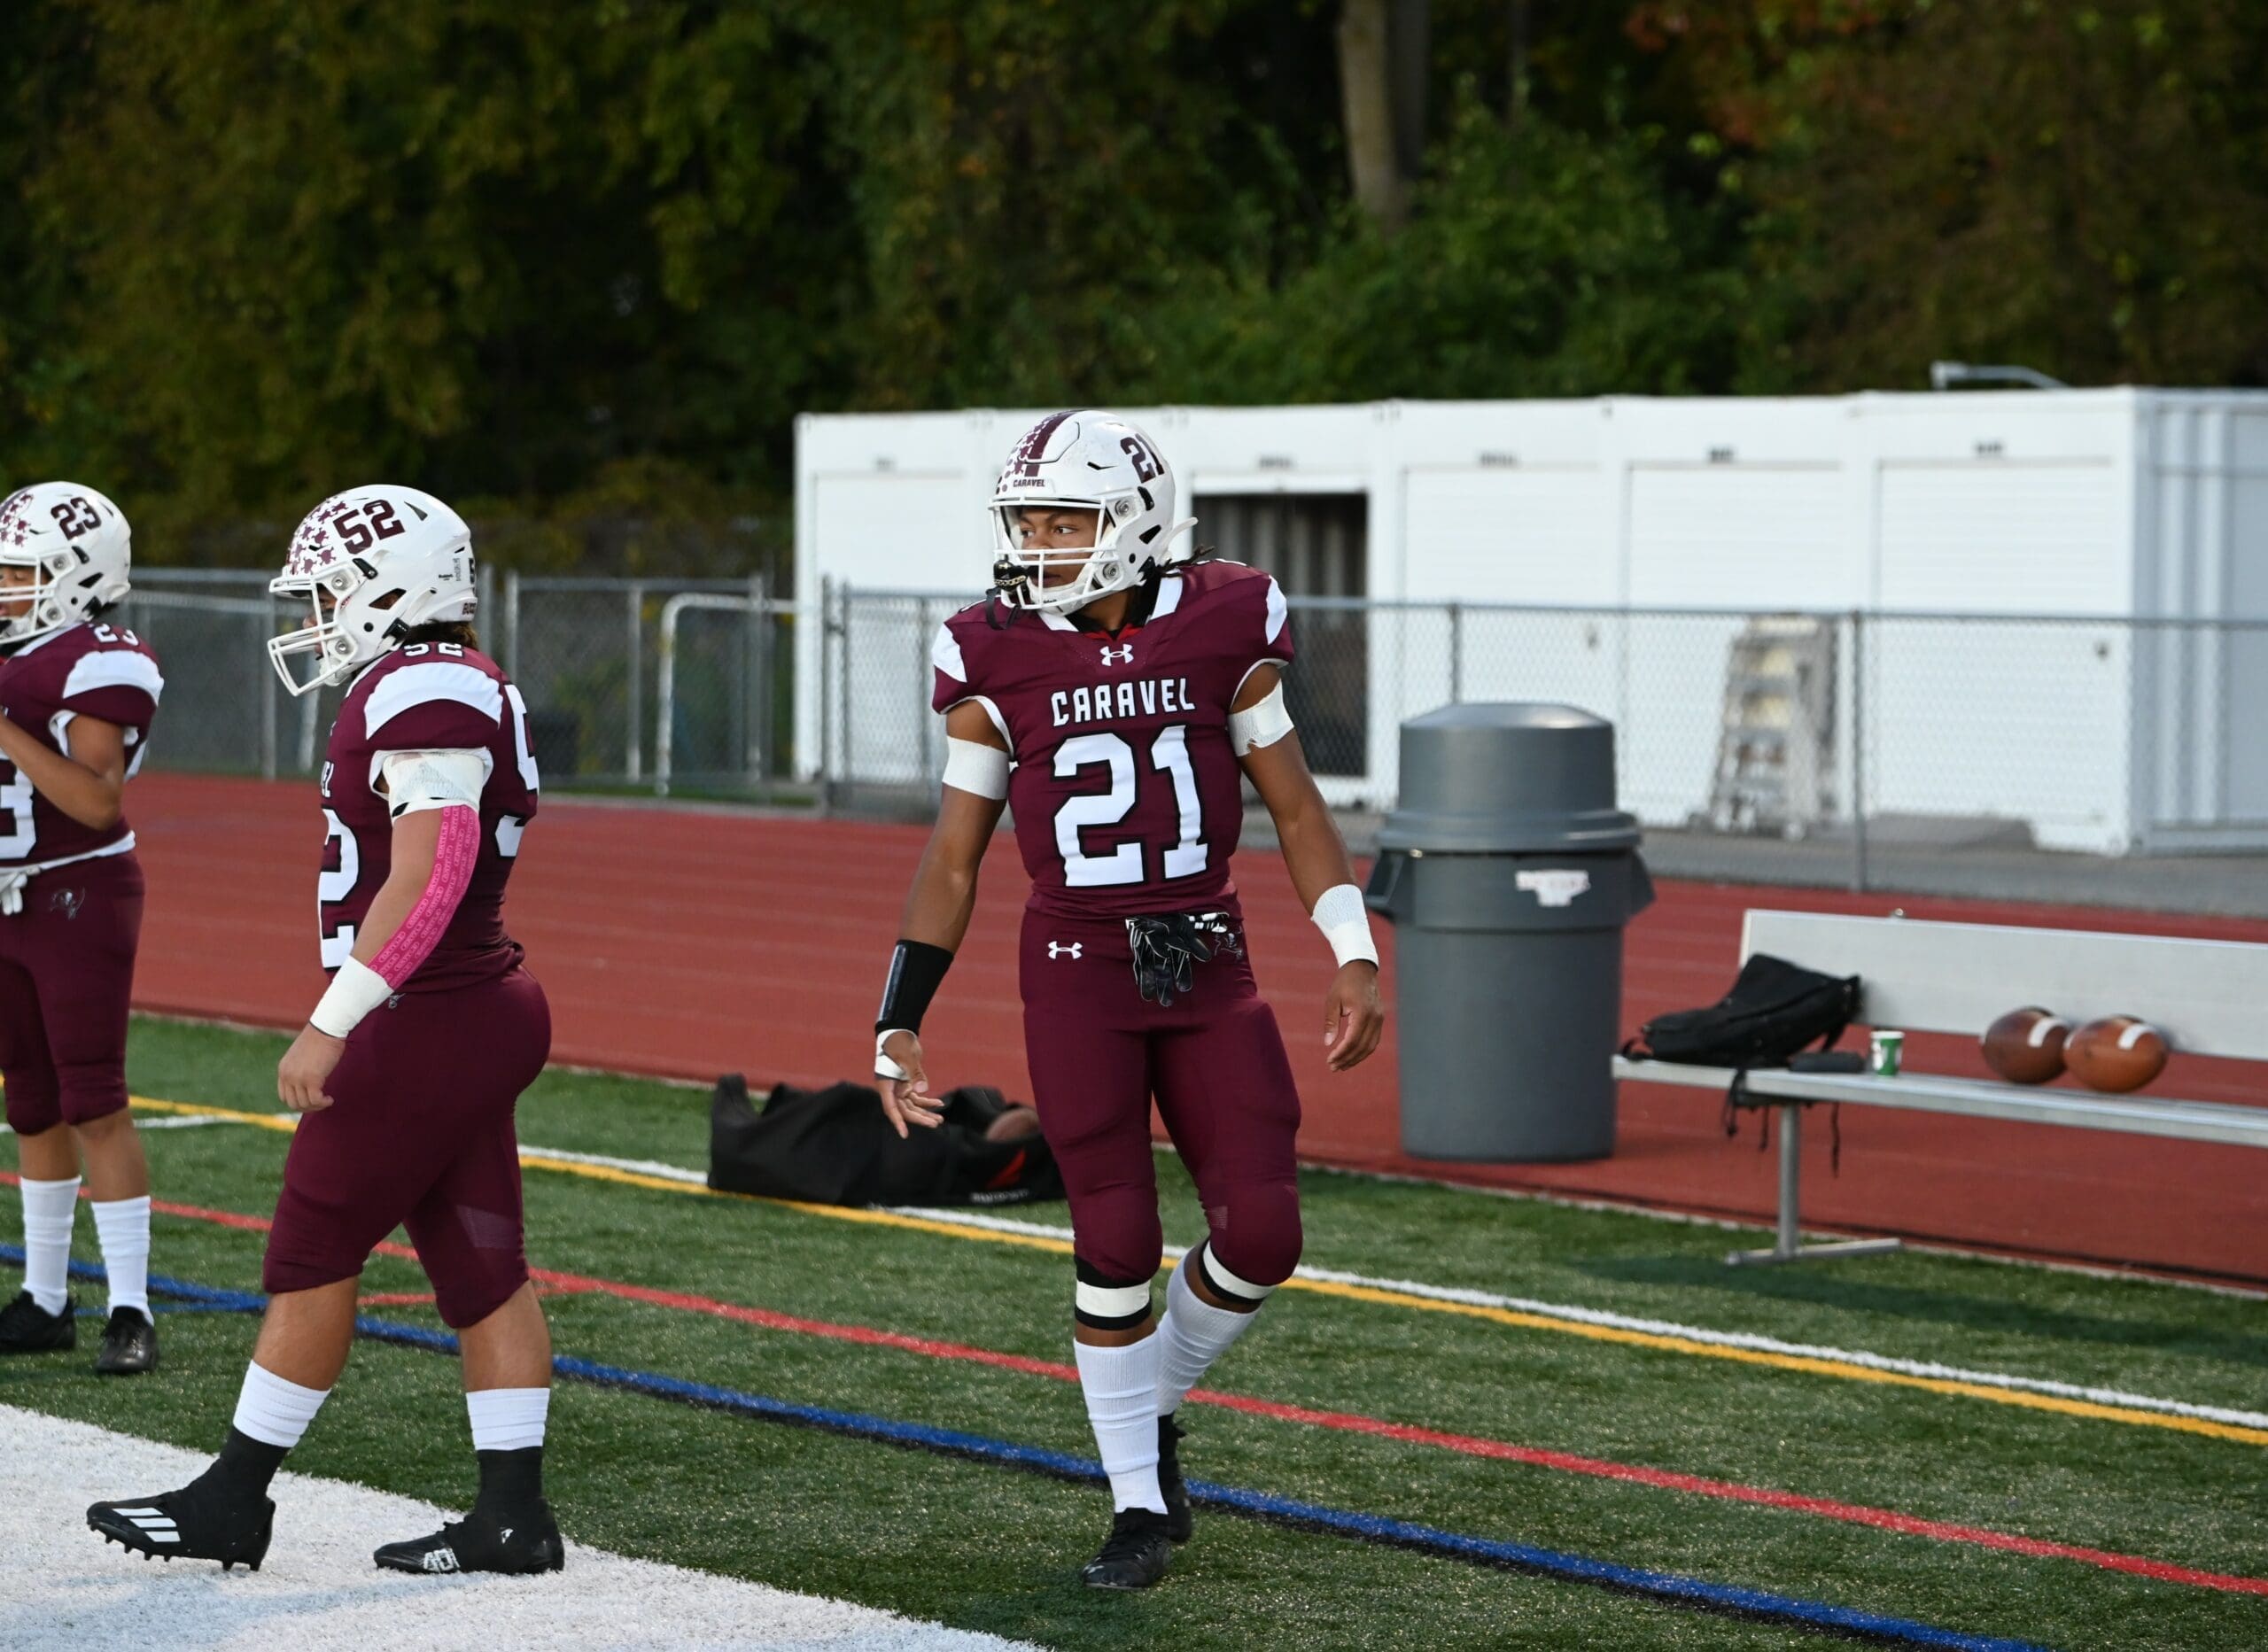 Featured image for “Caravel remains unbeaten with win over Woodbridge”